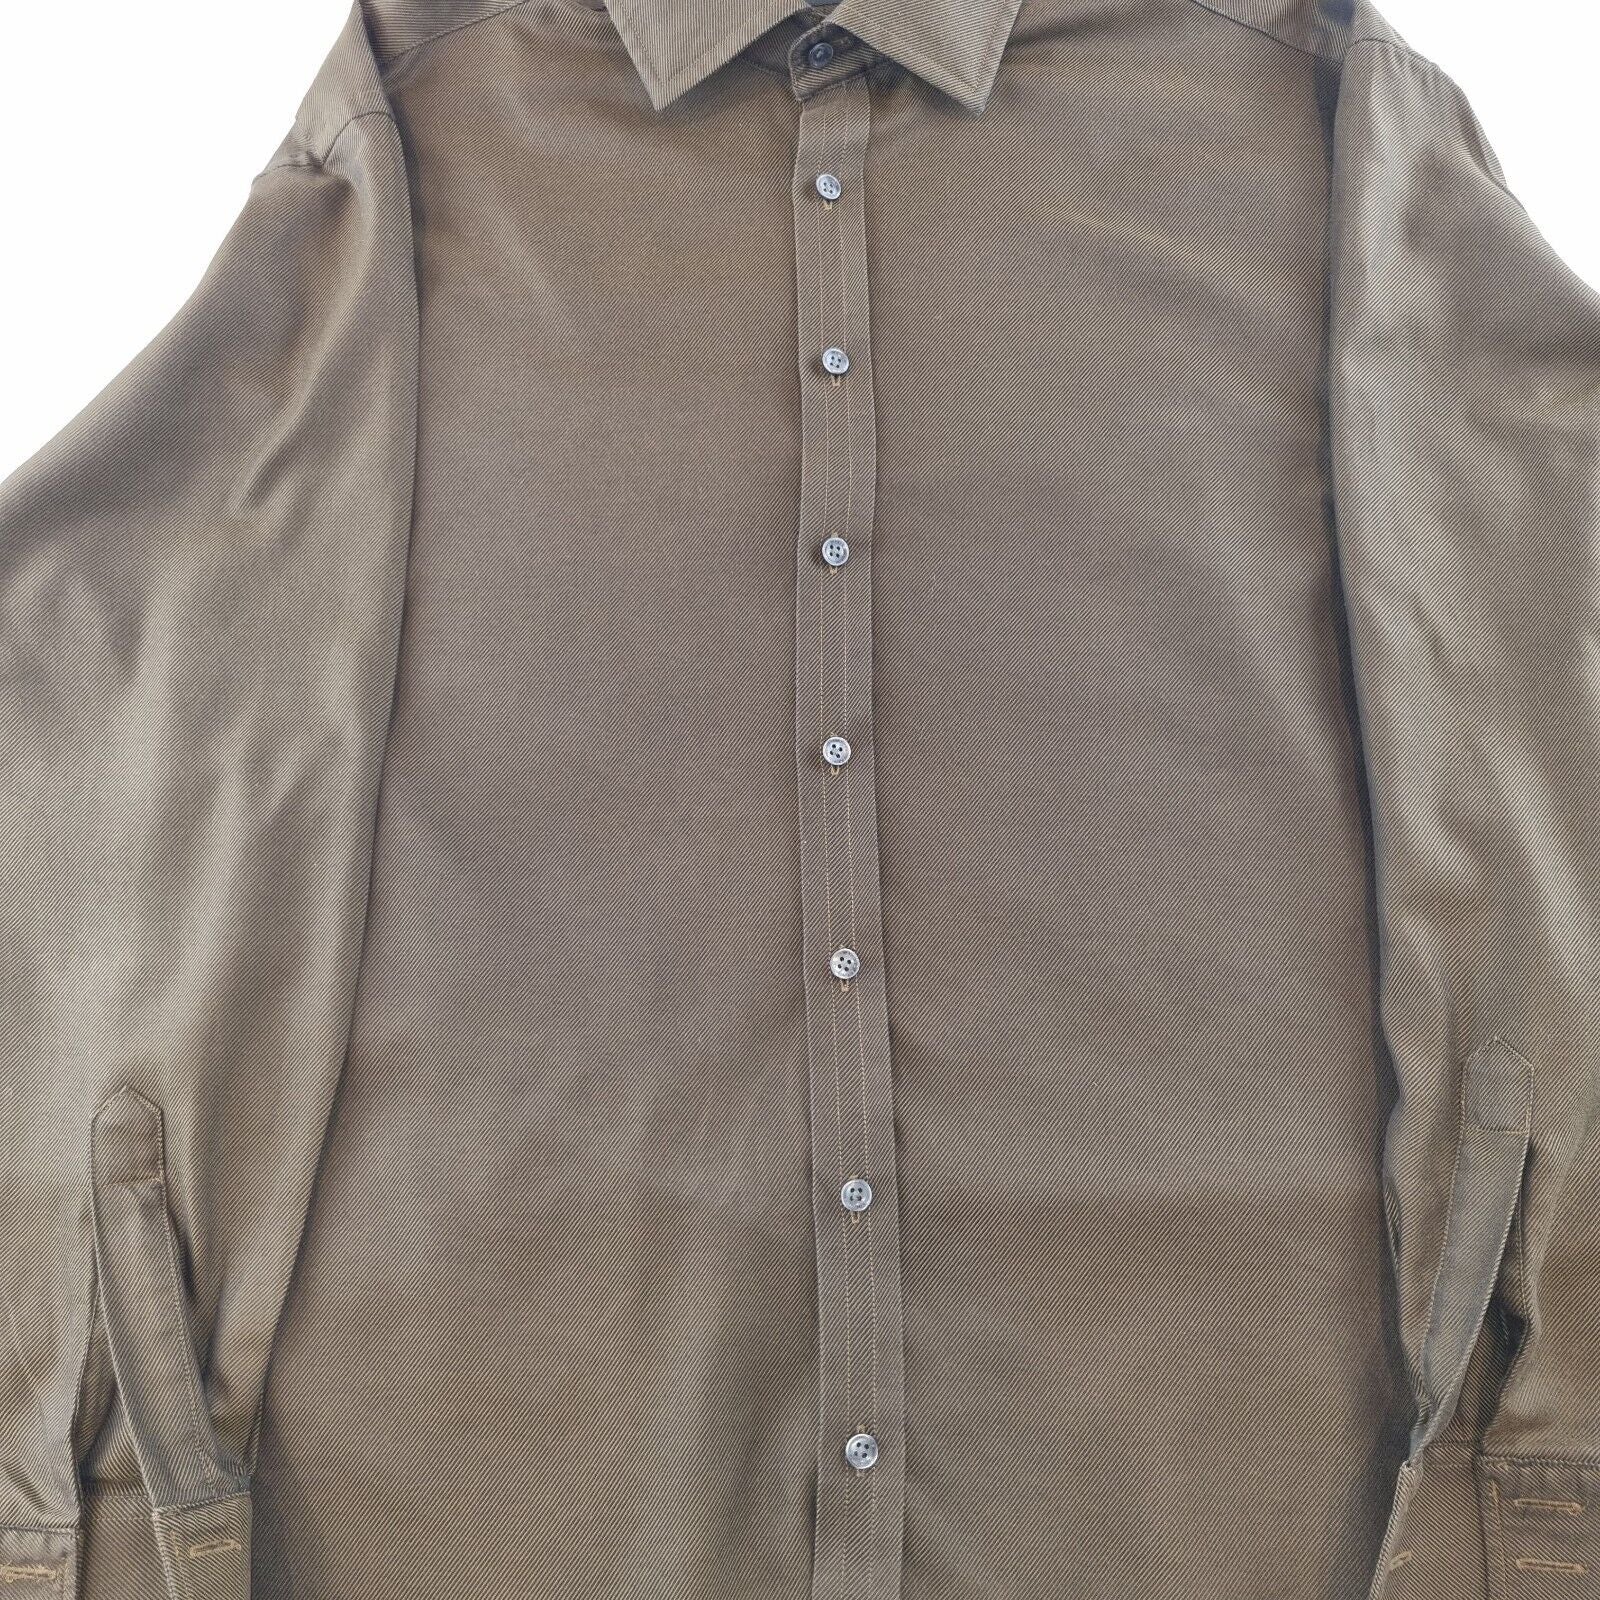 Mens Ted Baker Endurance Brown Shirt Button Up Smart Work Casual Size 17.5 - Bonnie Lassio